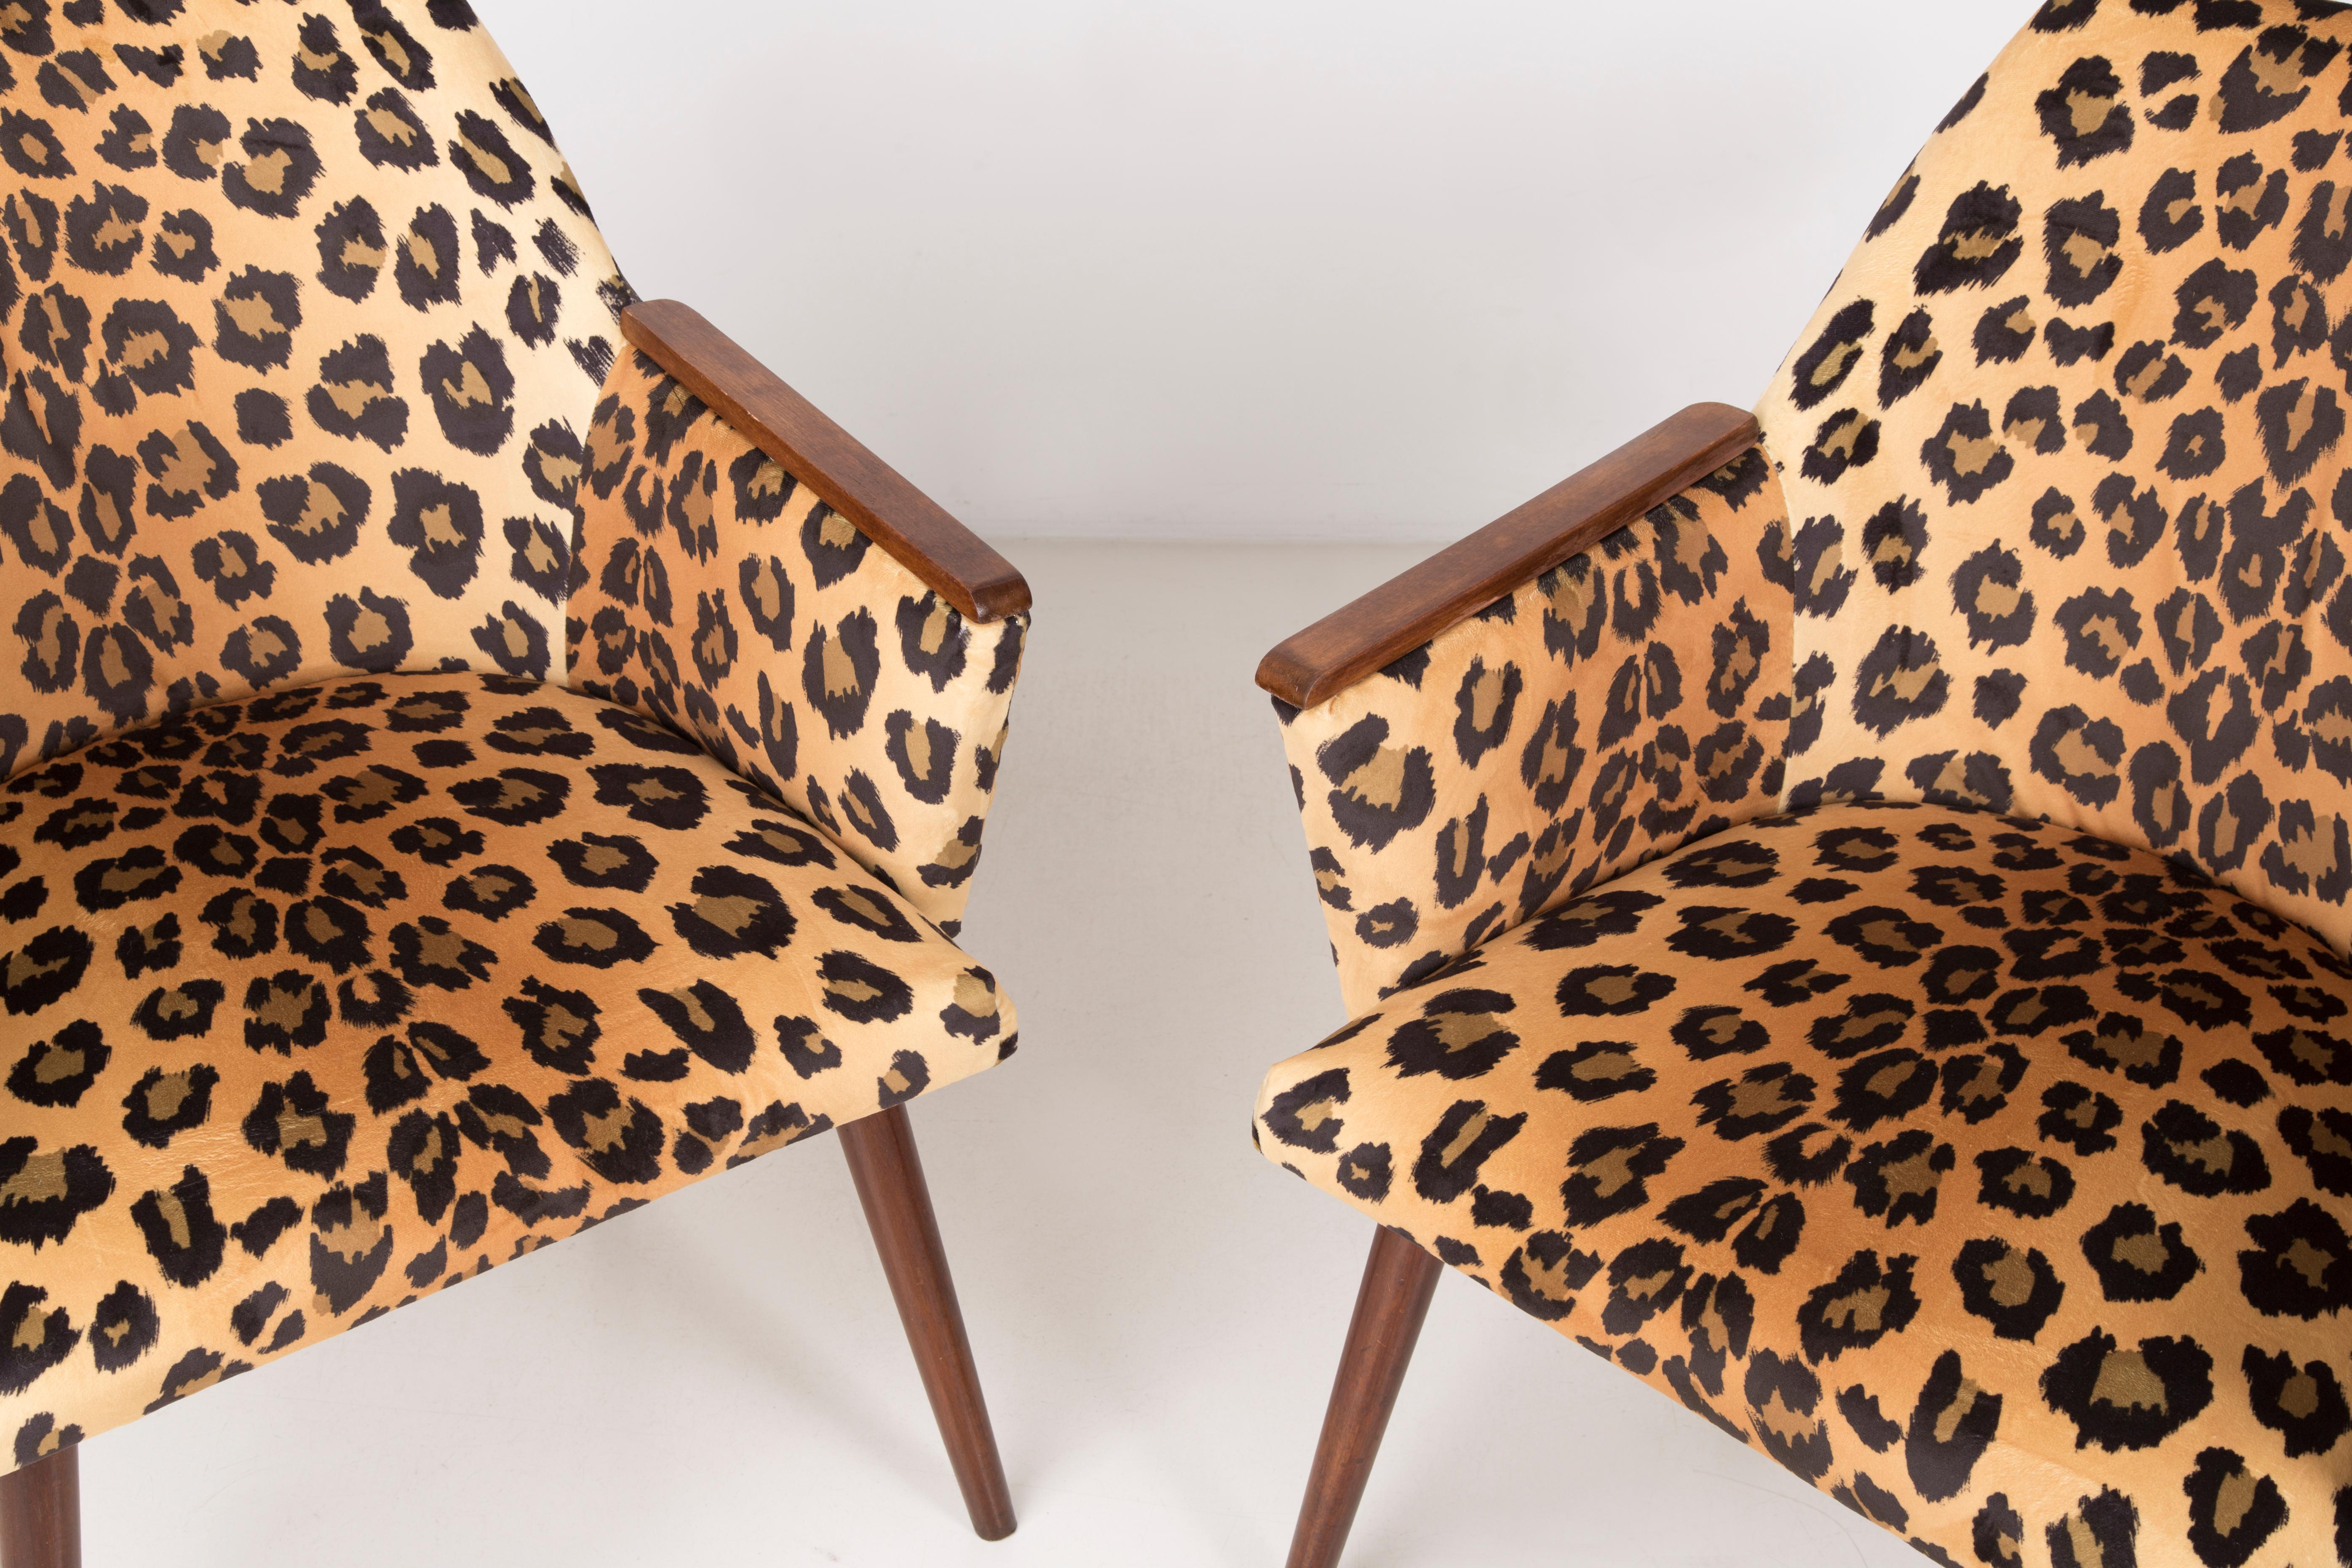 Velvet Set of Two Mid-Century Modern Leopard Print Chairs, 1960s, Germany